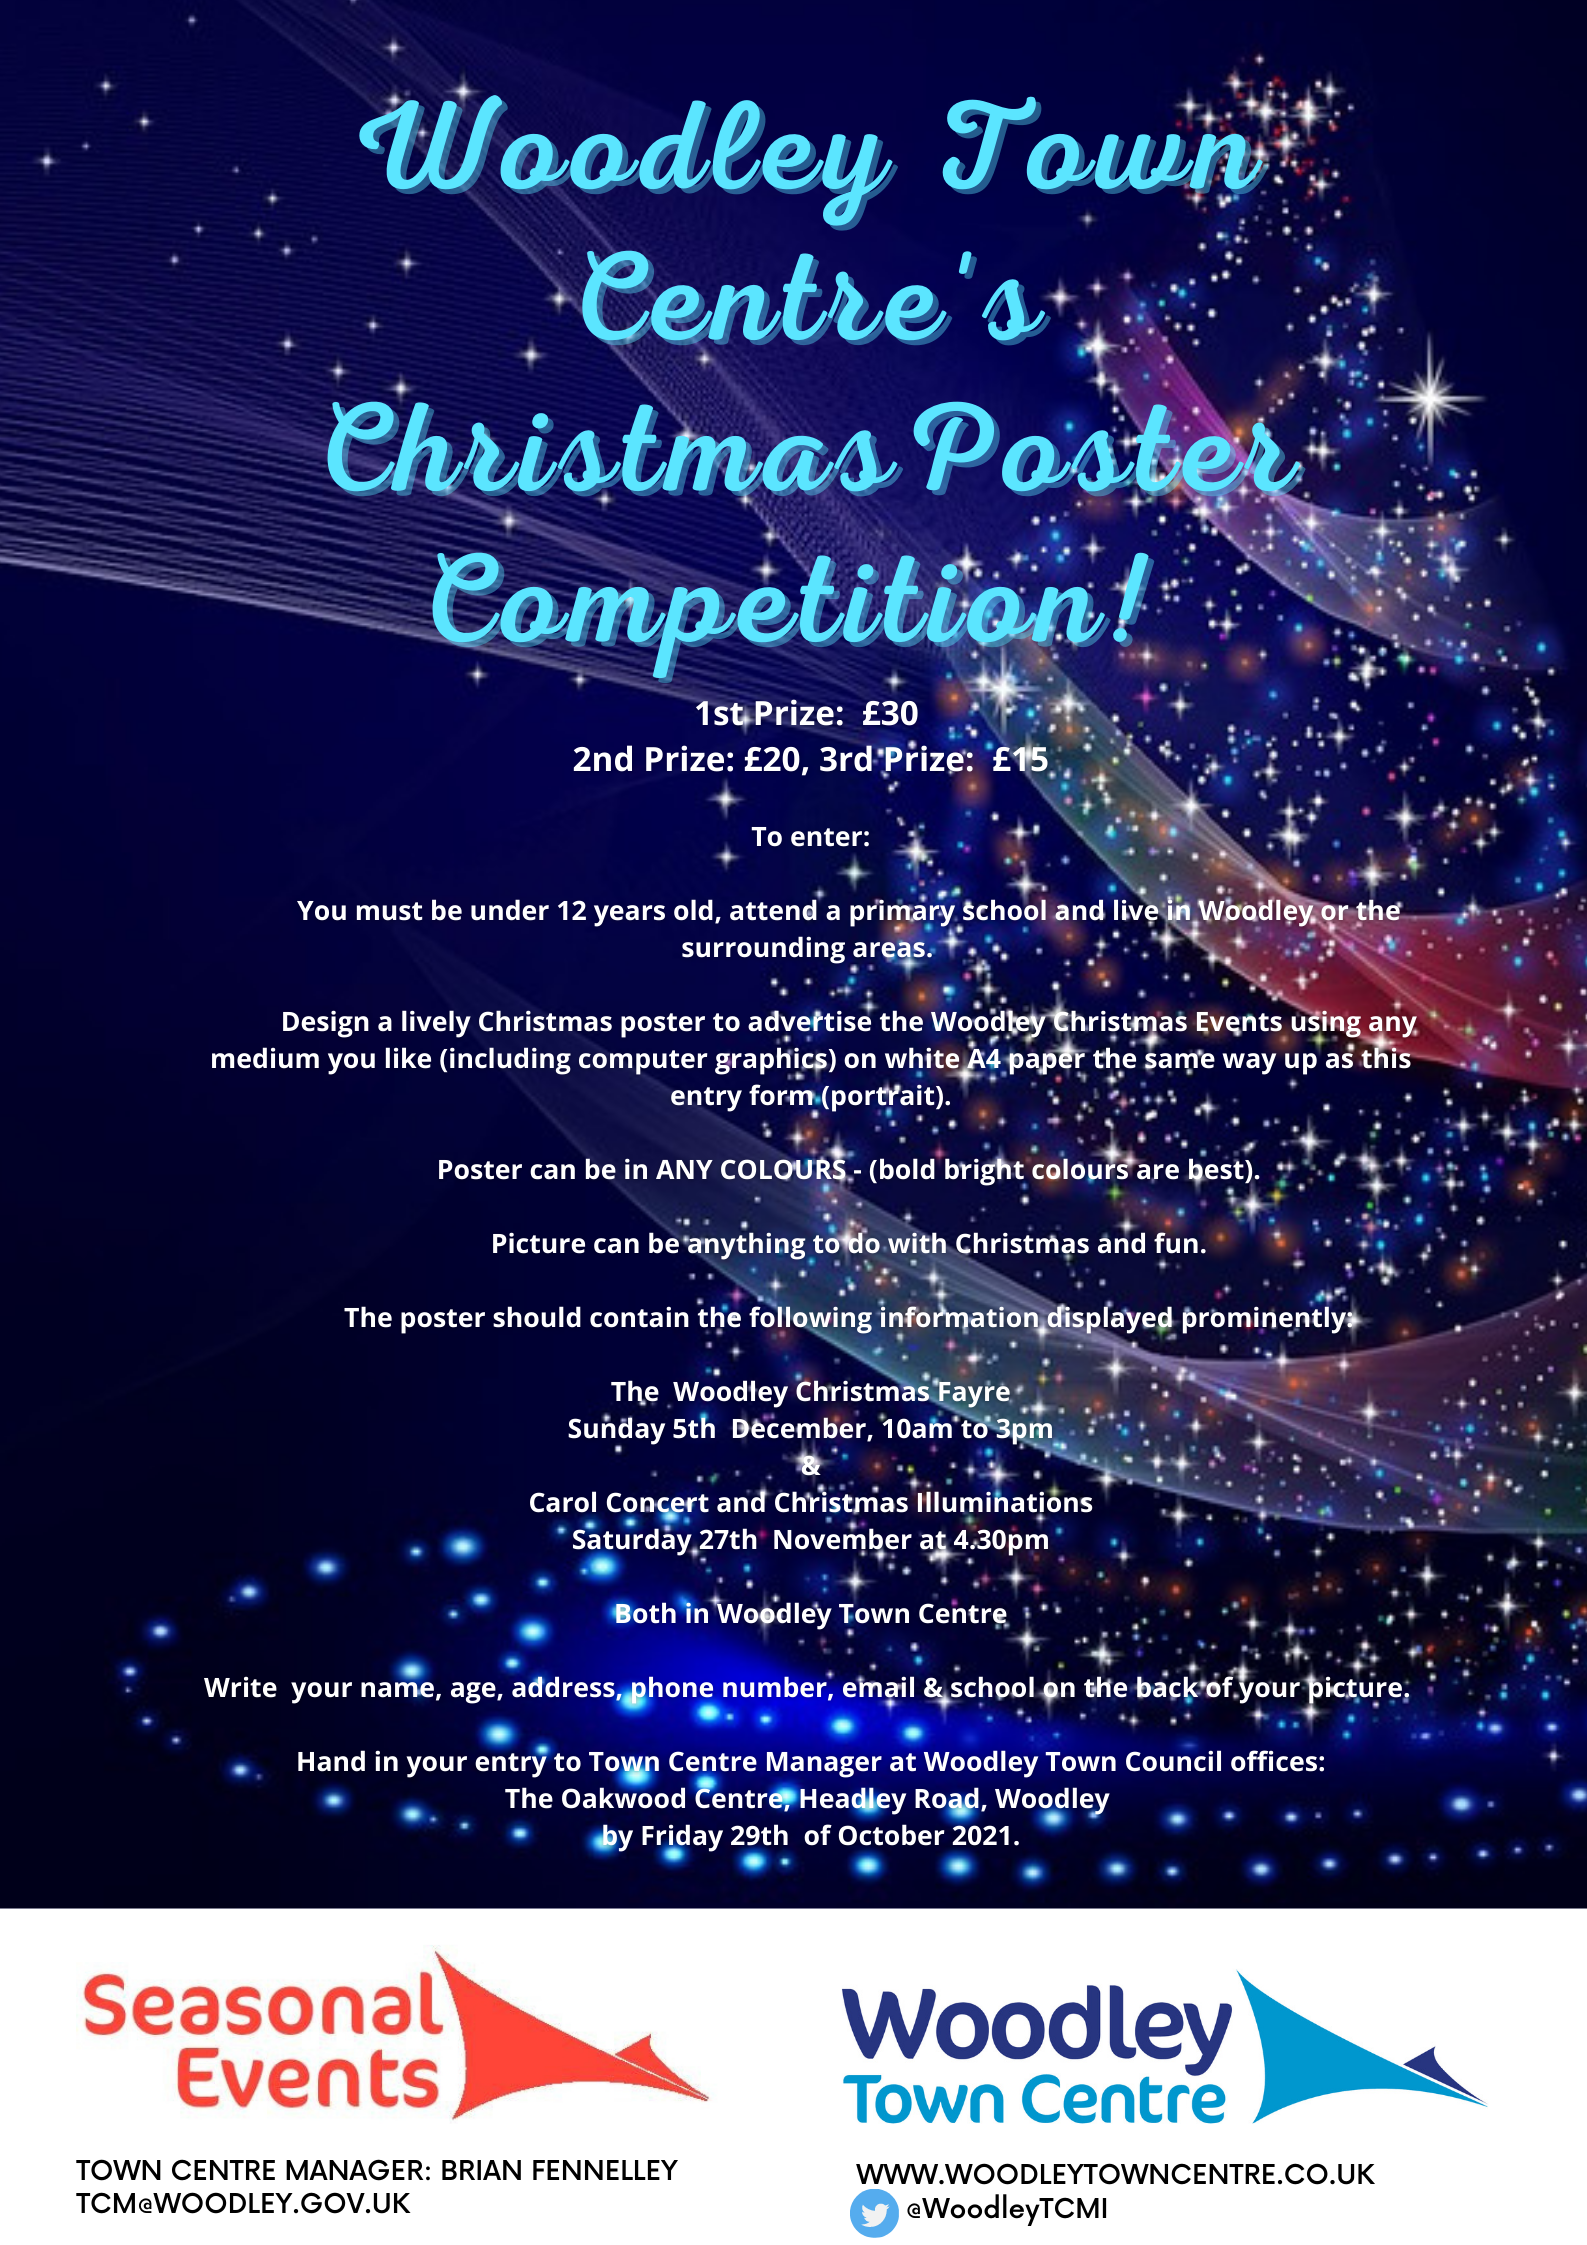 Woodley Town Centre Christmas poster competition